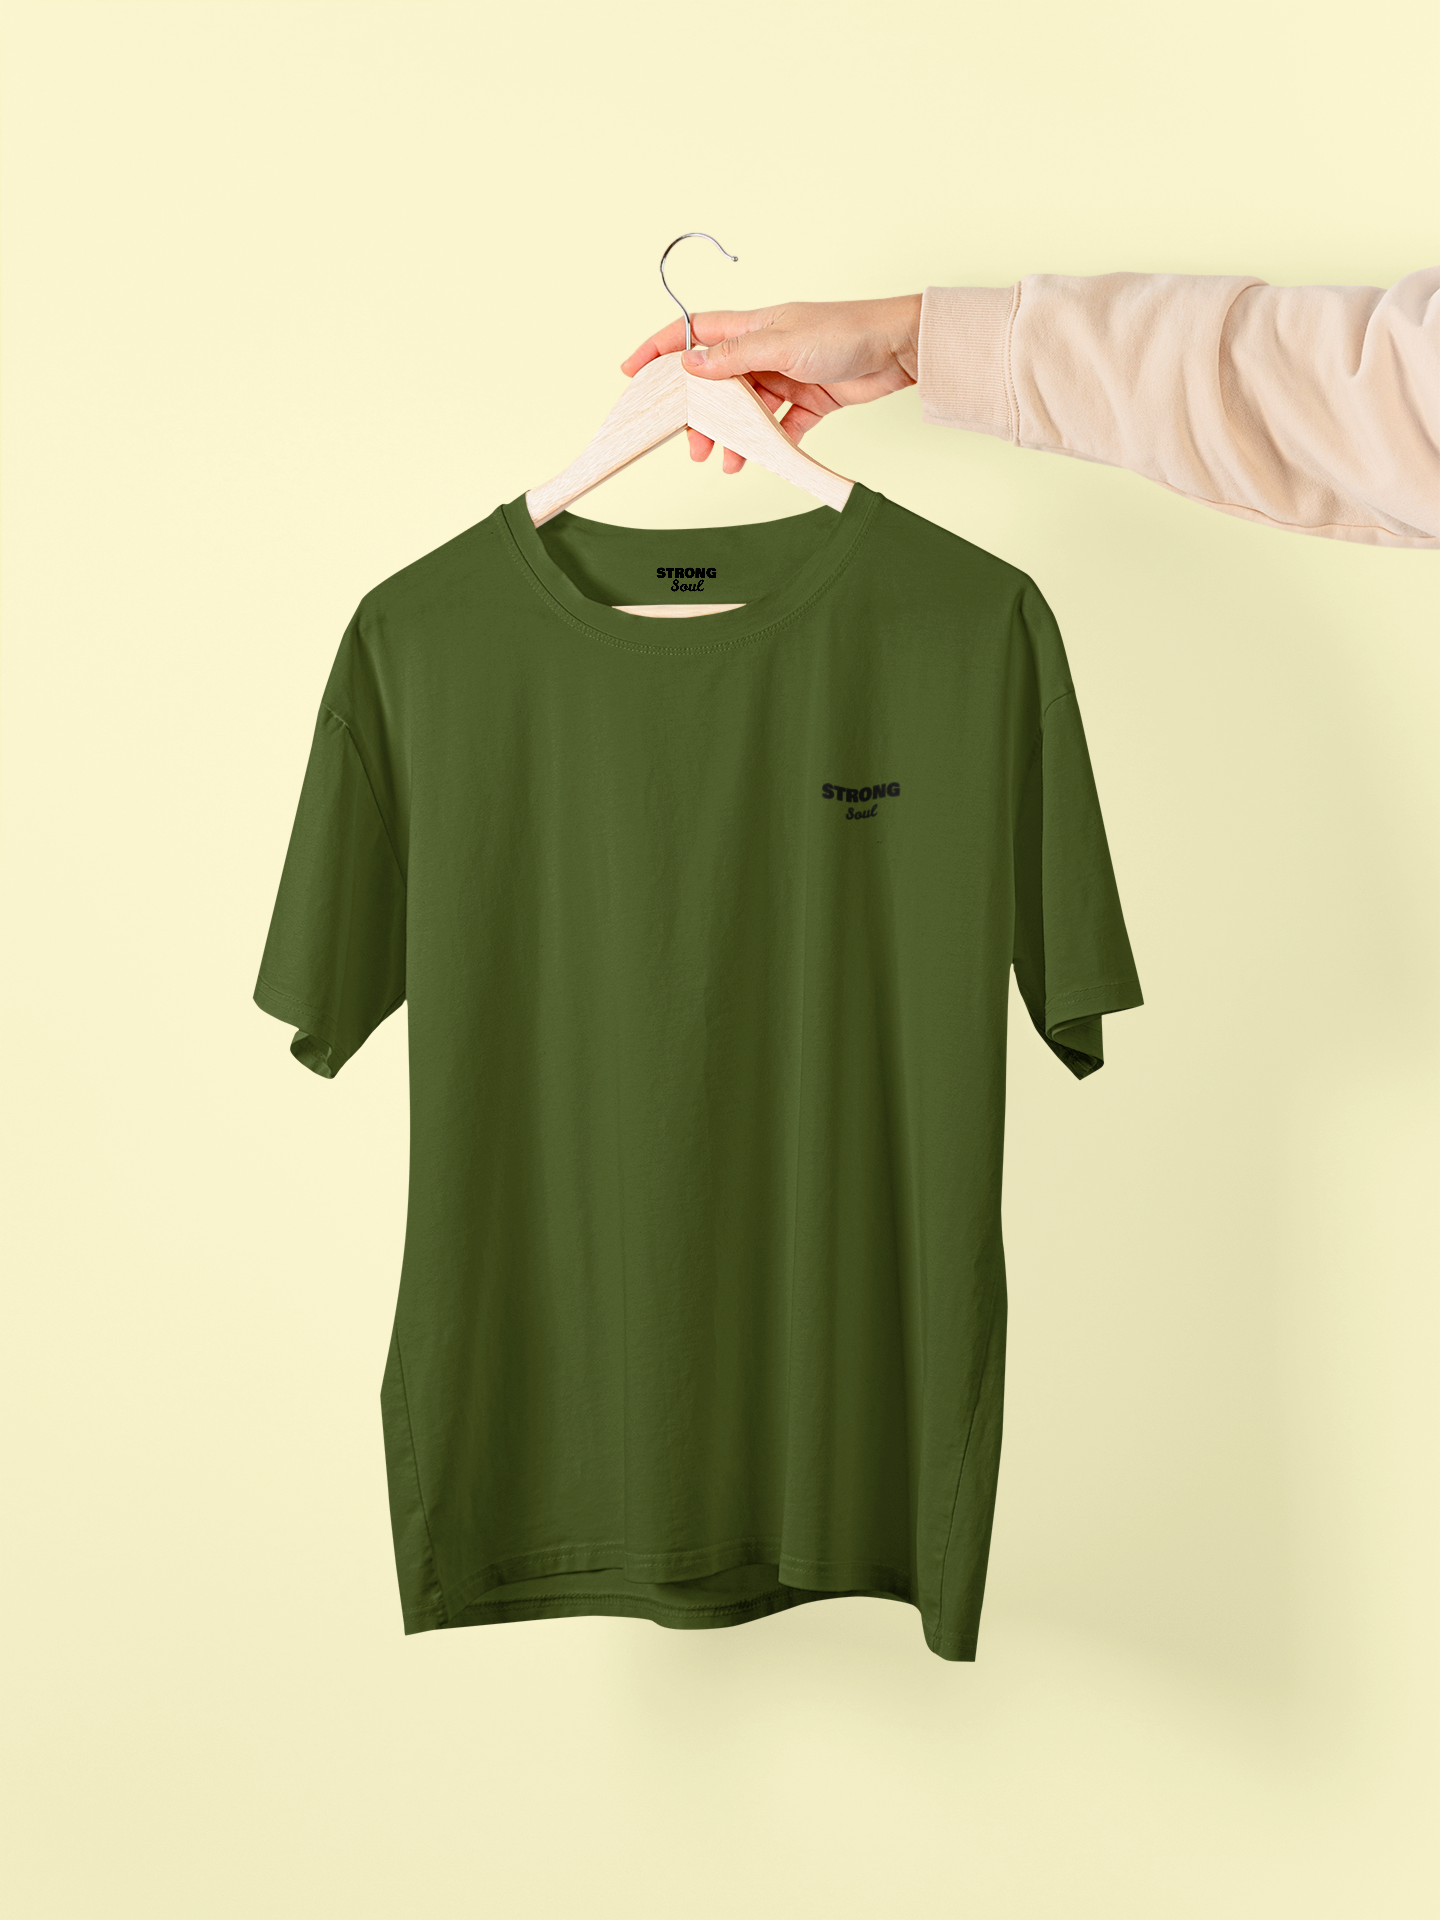 Army Green Solid - Gym T Shirt Strong Soul Shirts & Tops